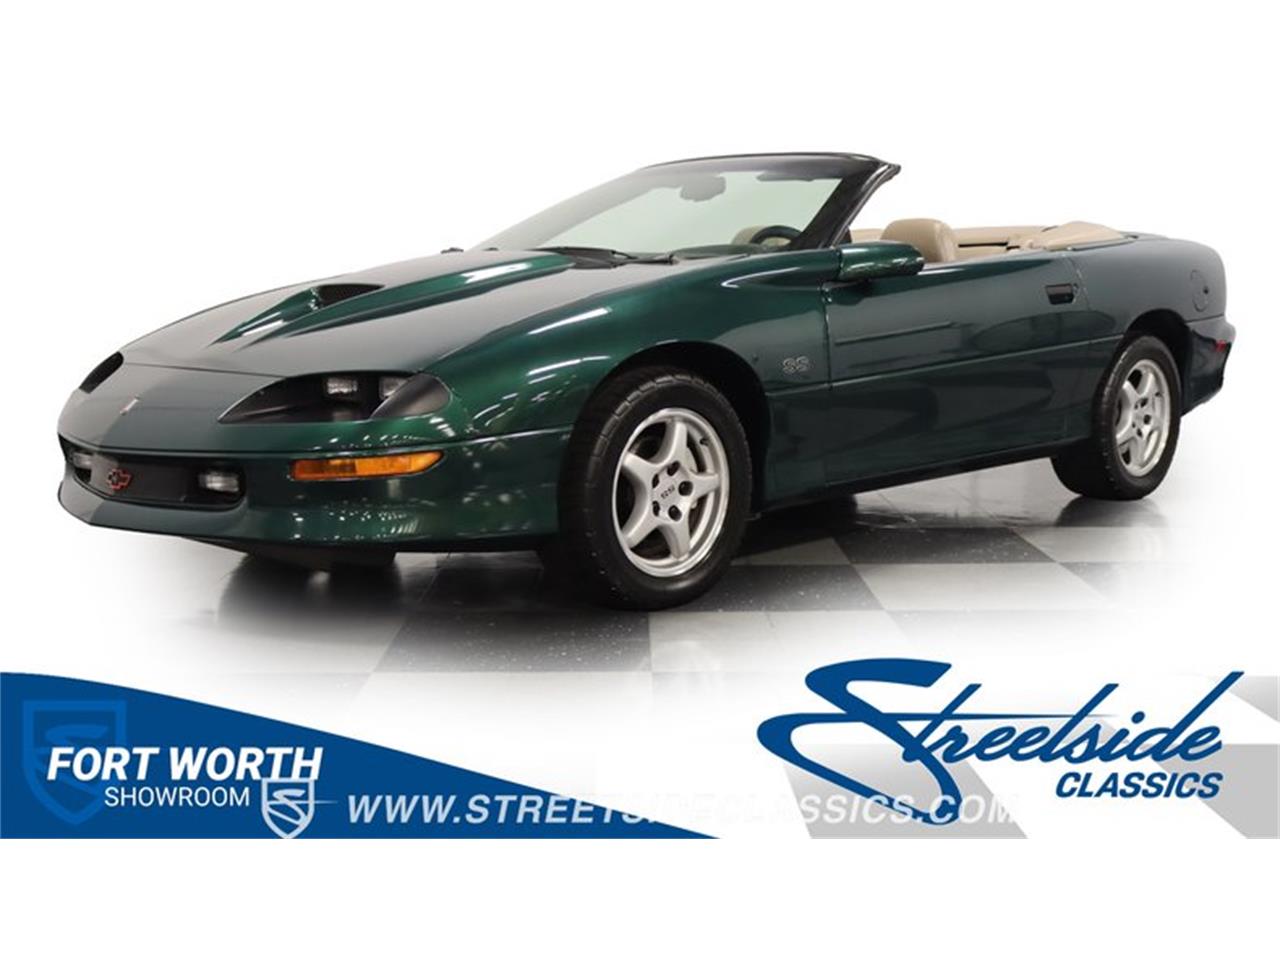 For Sale: 1996 Chevrolet Camaro in Ft Worth, Texas for sale in Fort Worth, TX